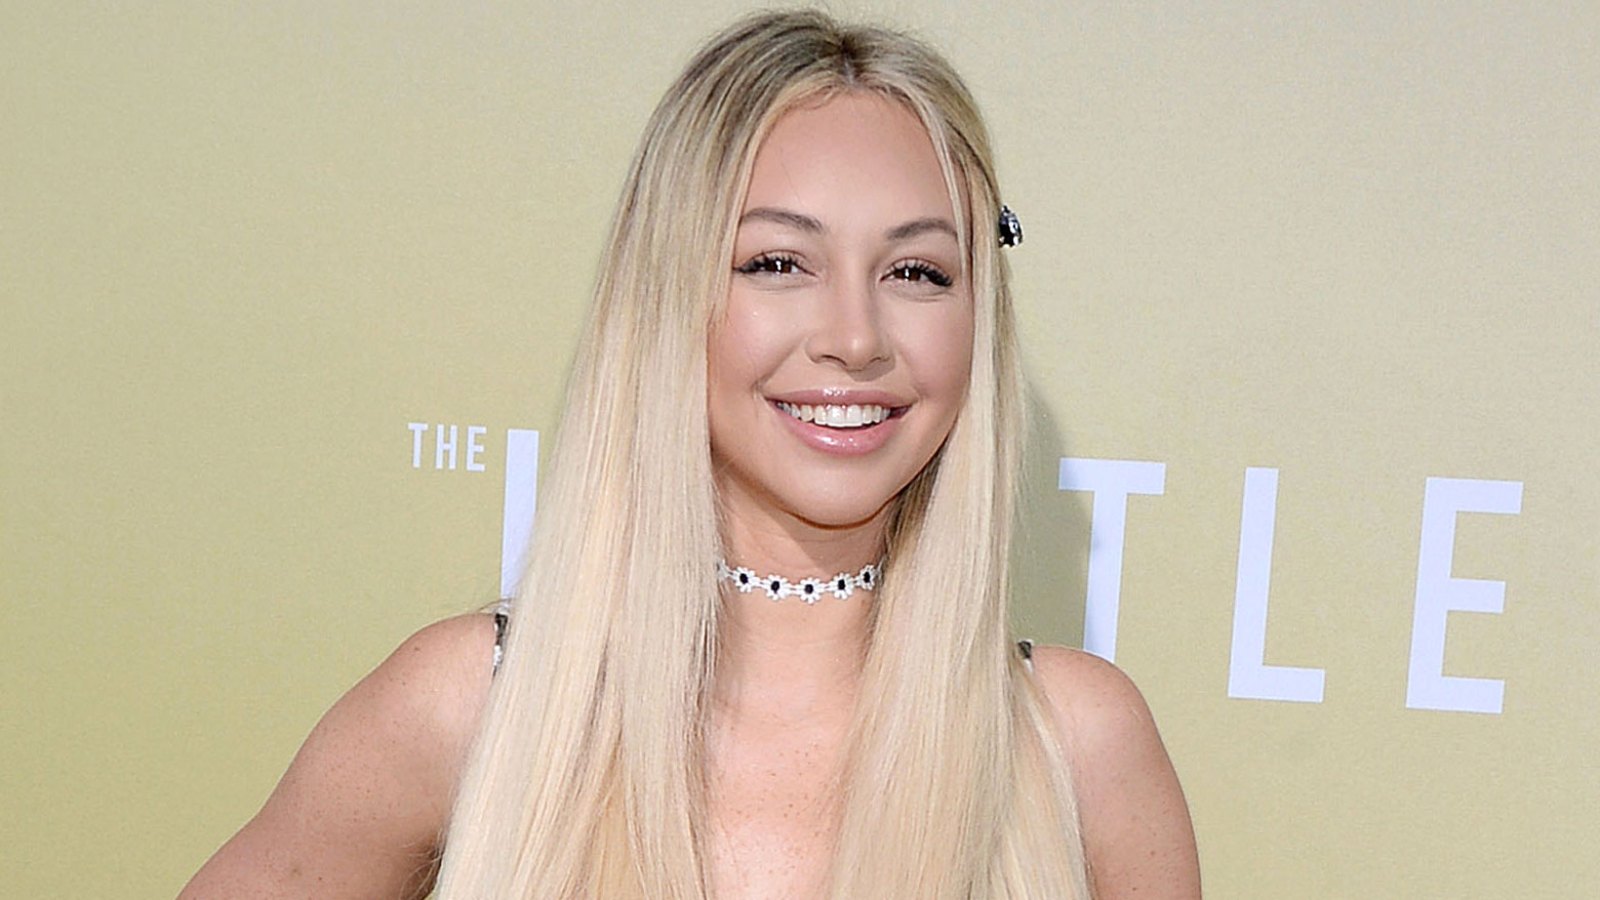 Bachelor's Corinne Olympios Is Dating Vincent Fratantoni After Split From Jon Yunger